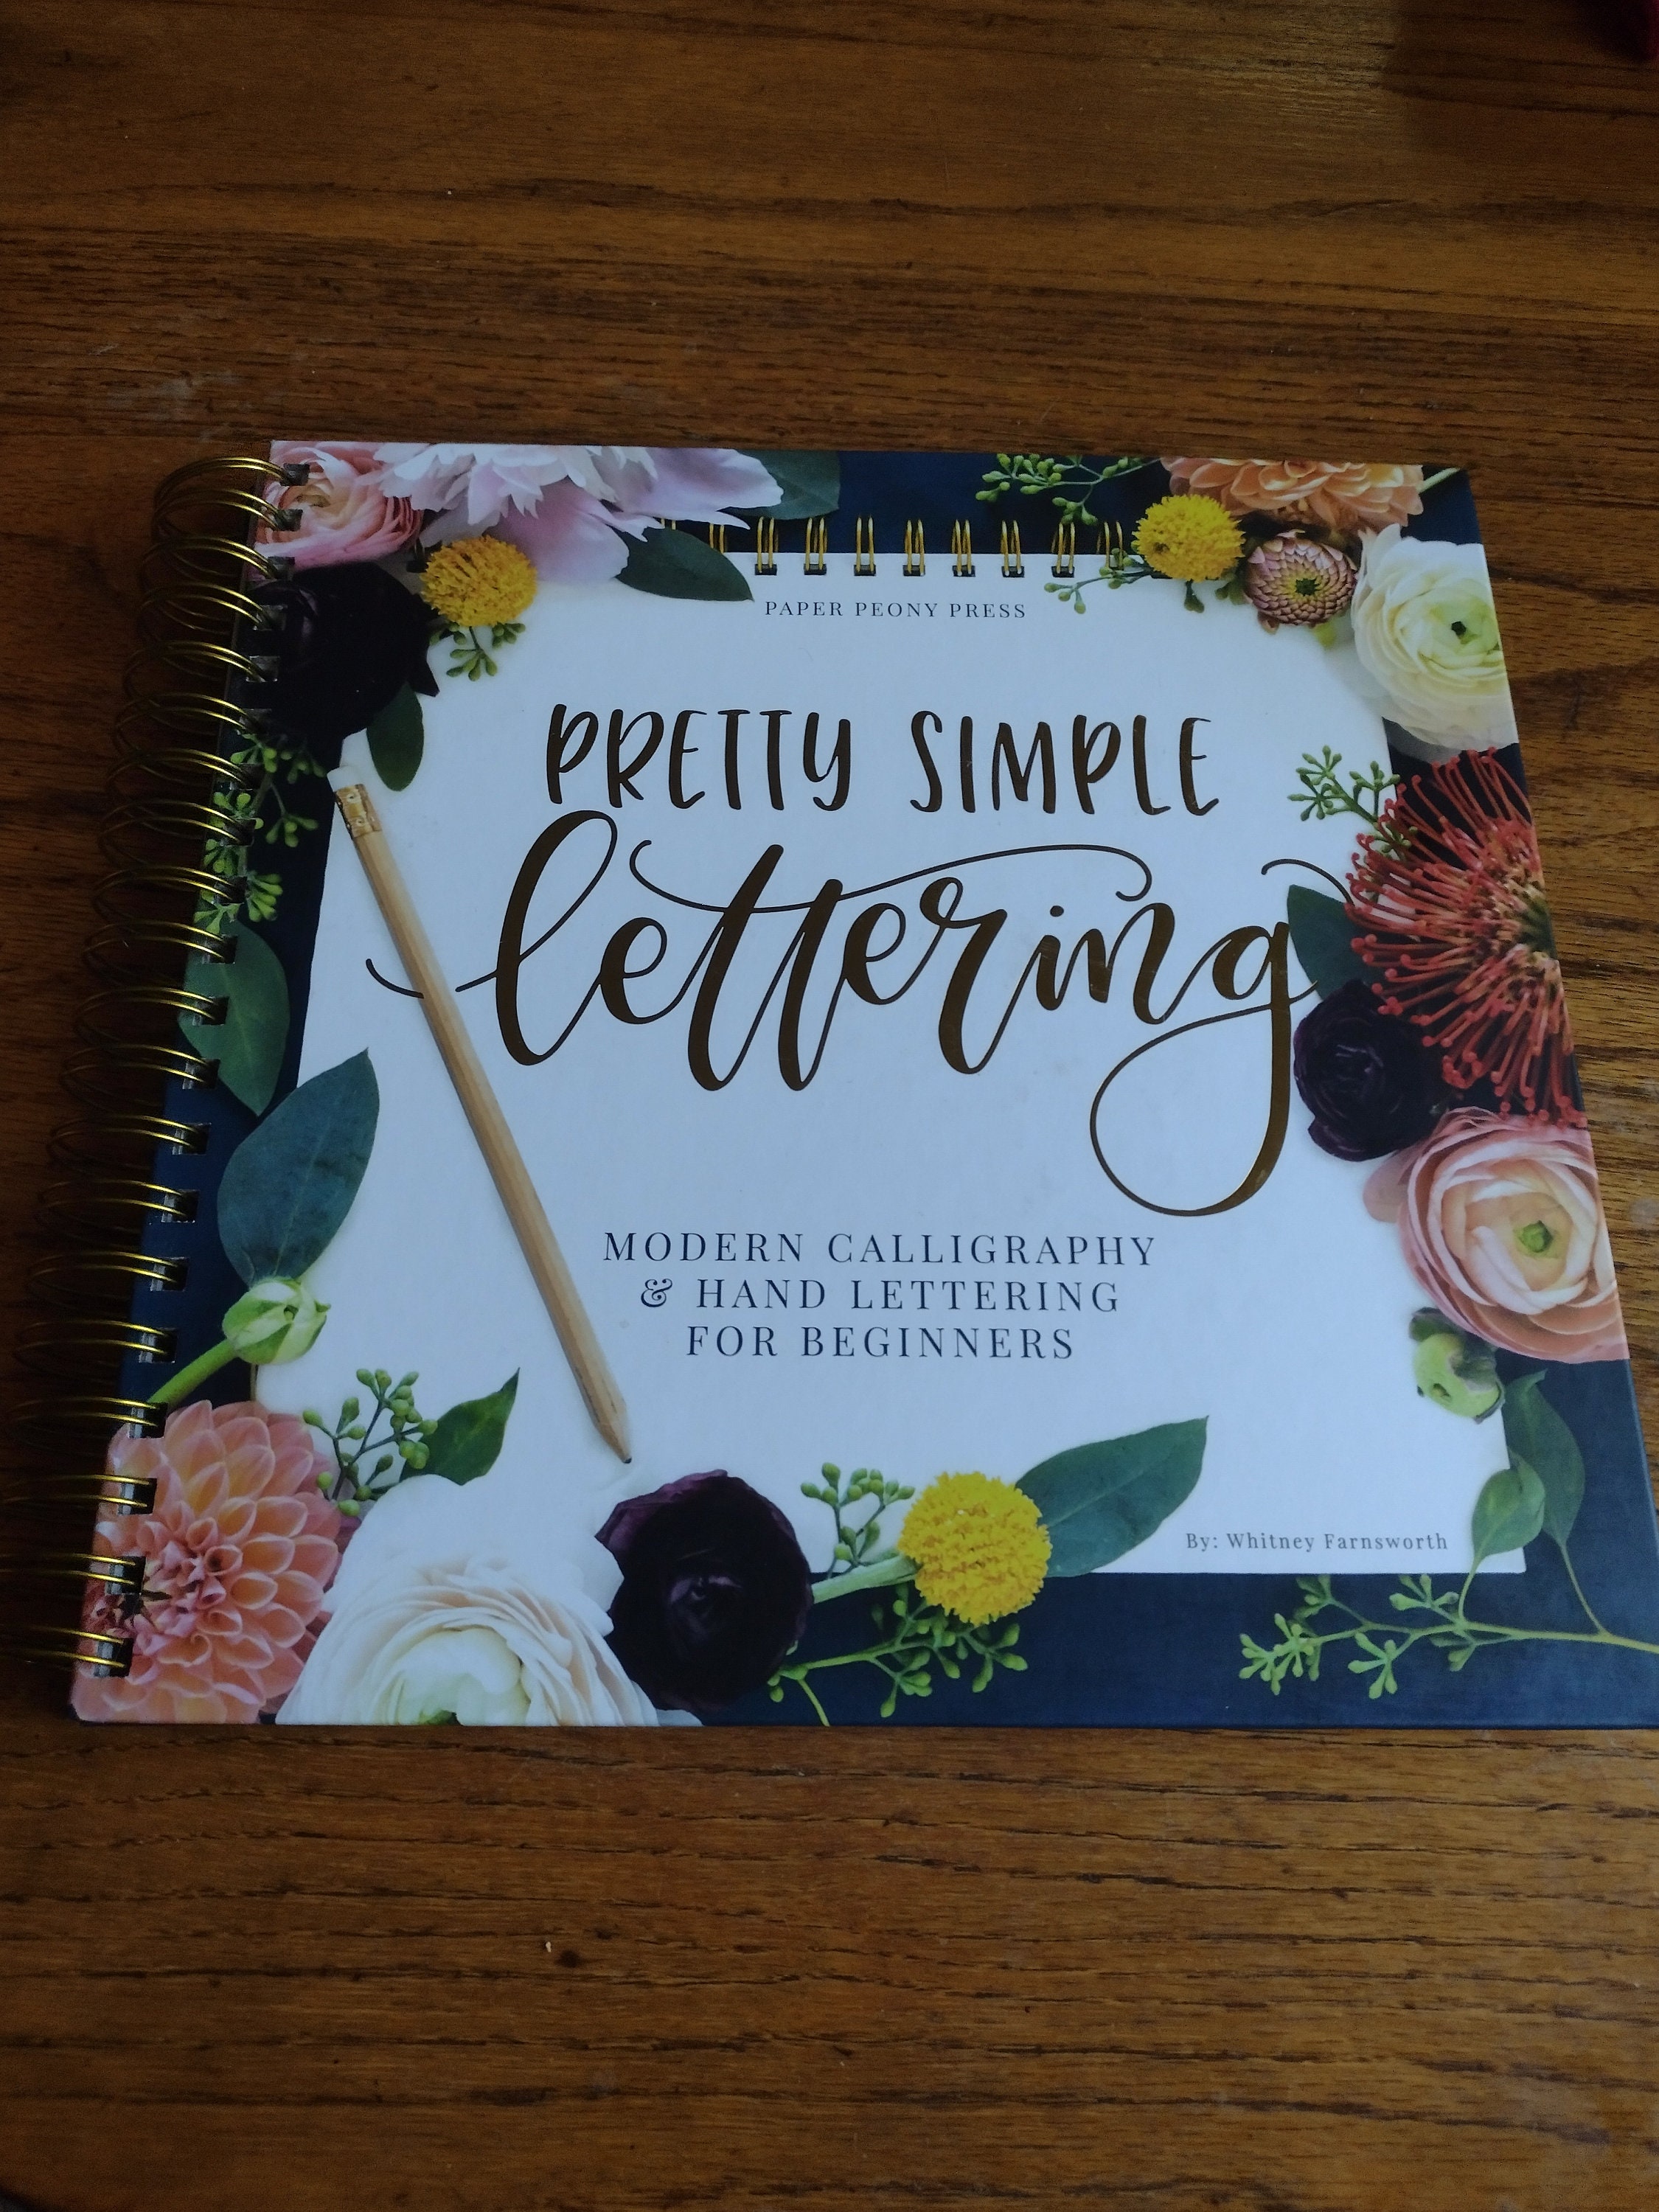 Pretty Simple Lettering: Hand Lettering & Calligraphy for Beginners